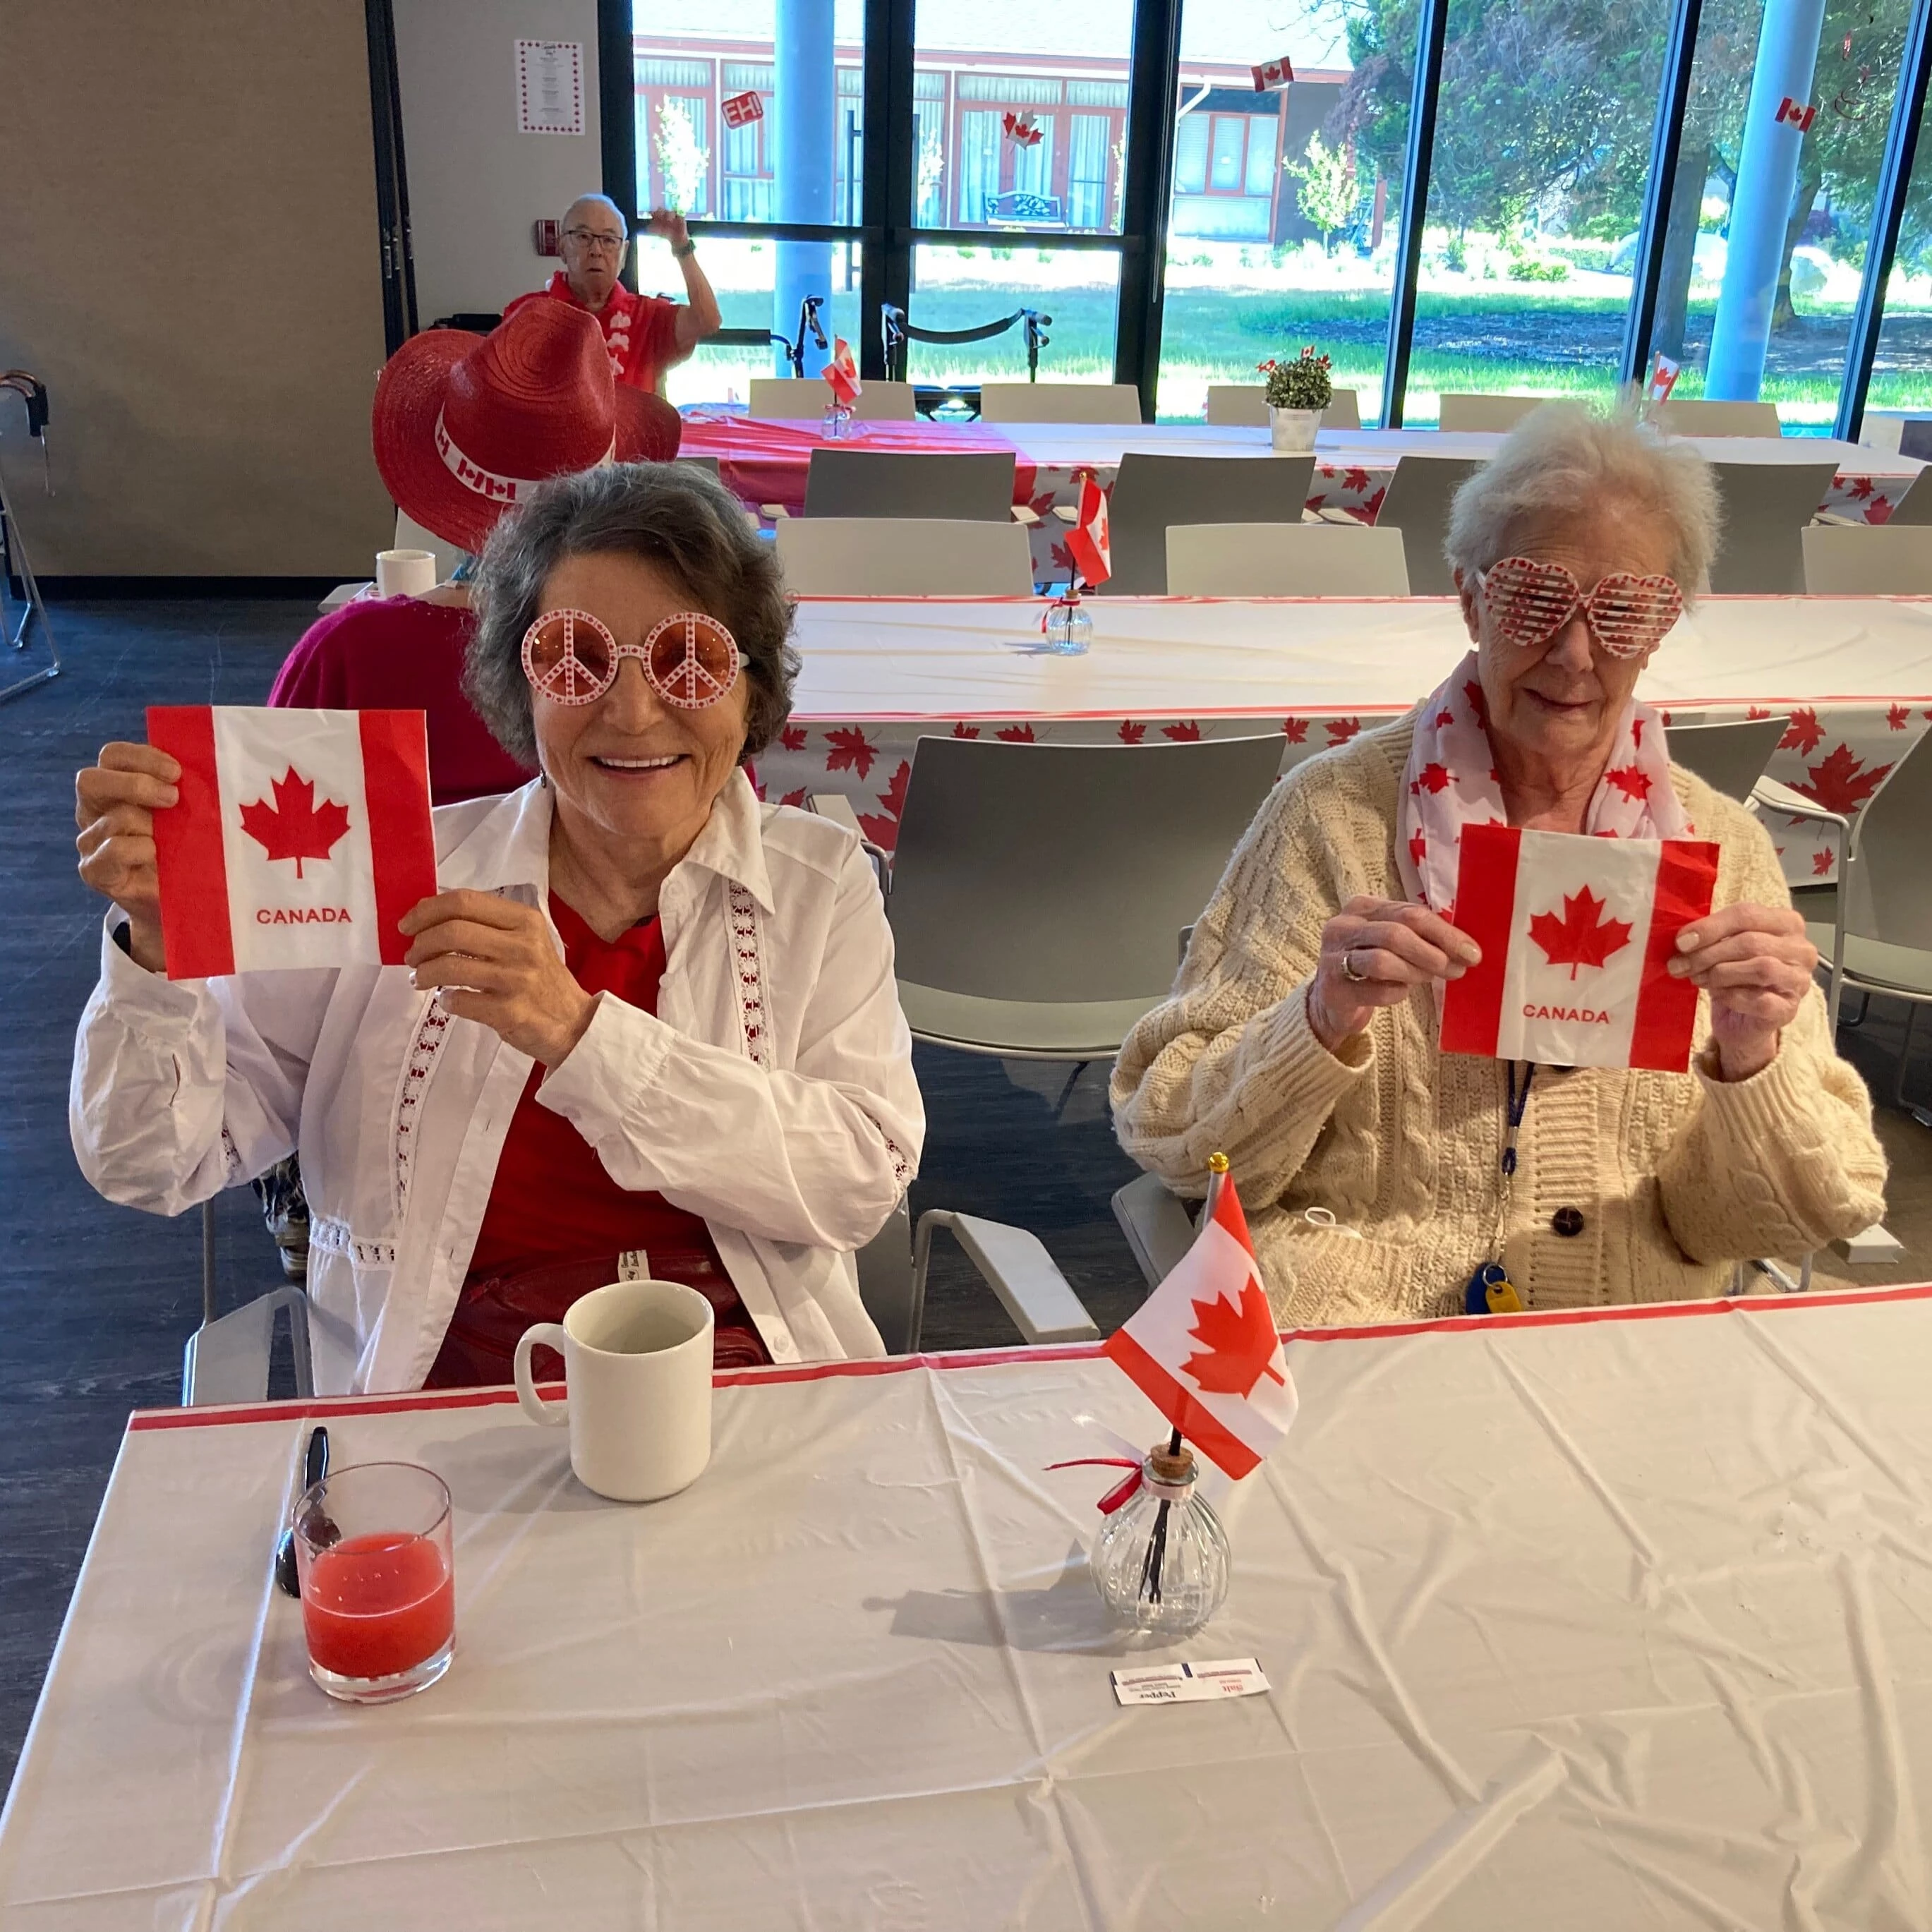 Some senior citizens celebrating Canada Day in their retirement home